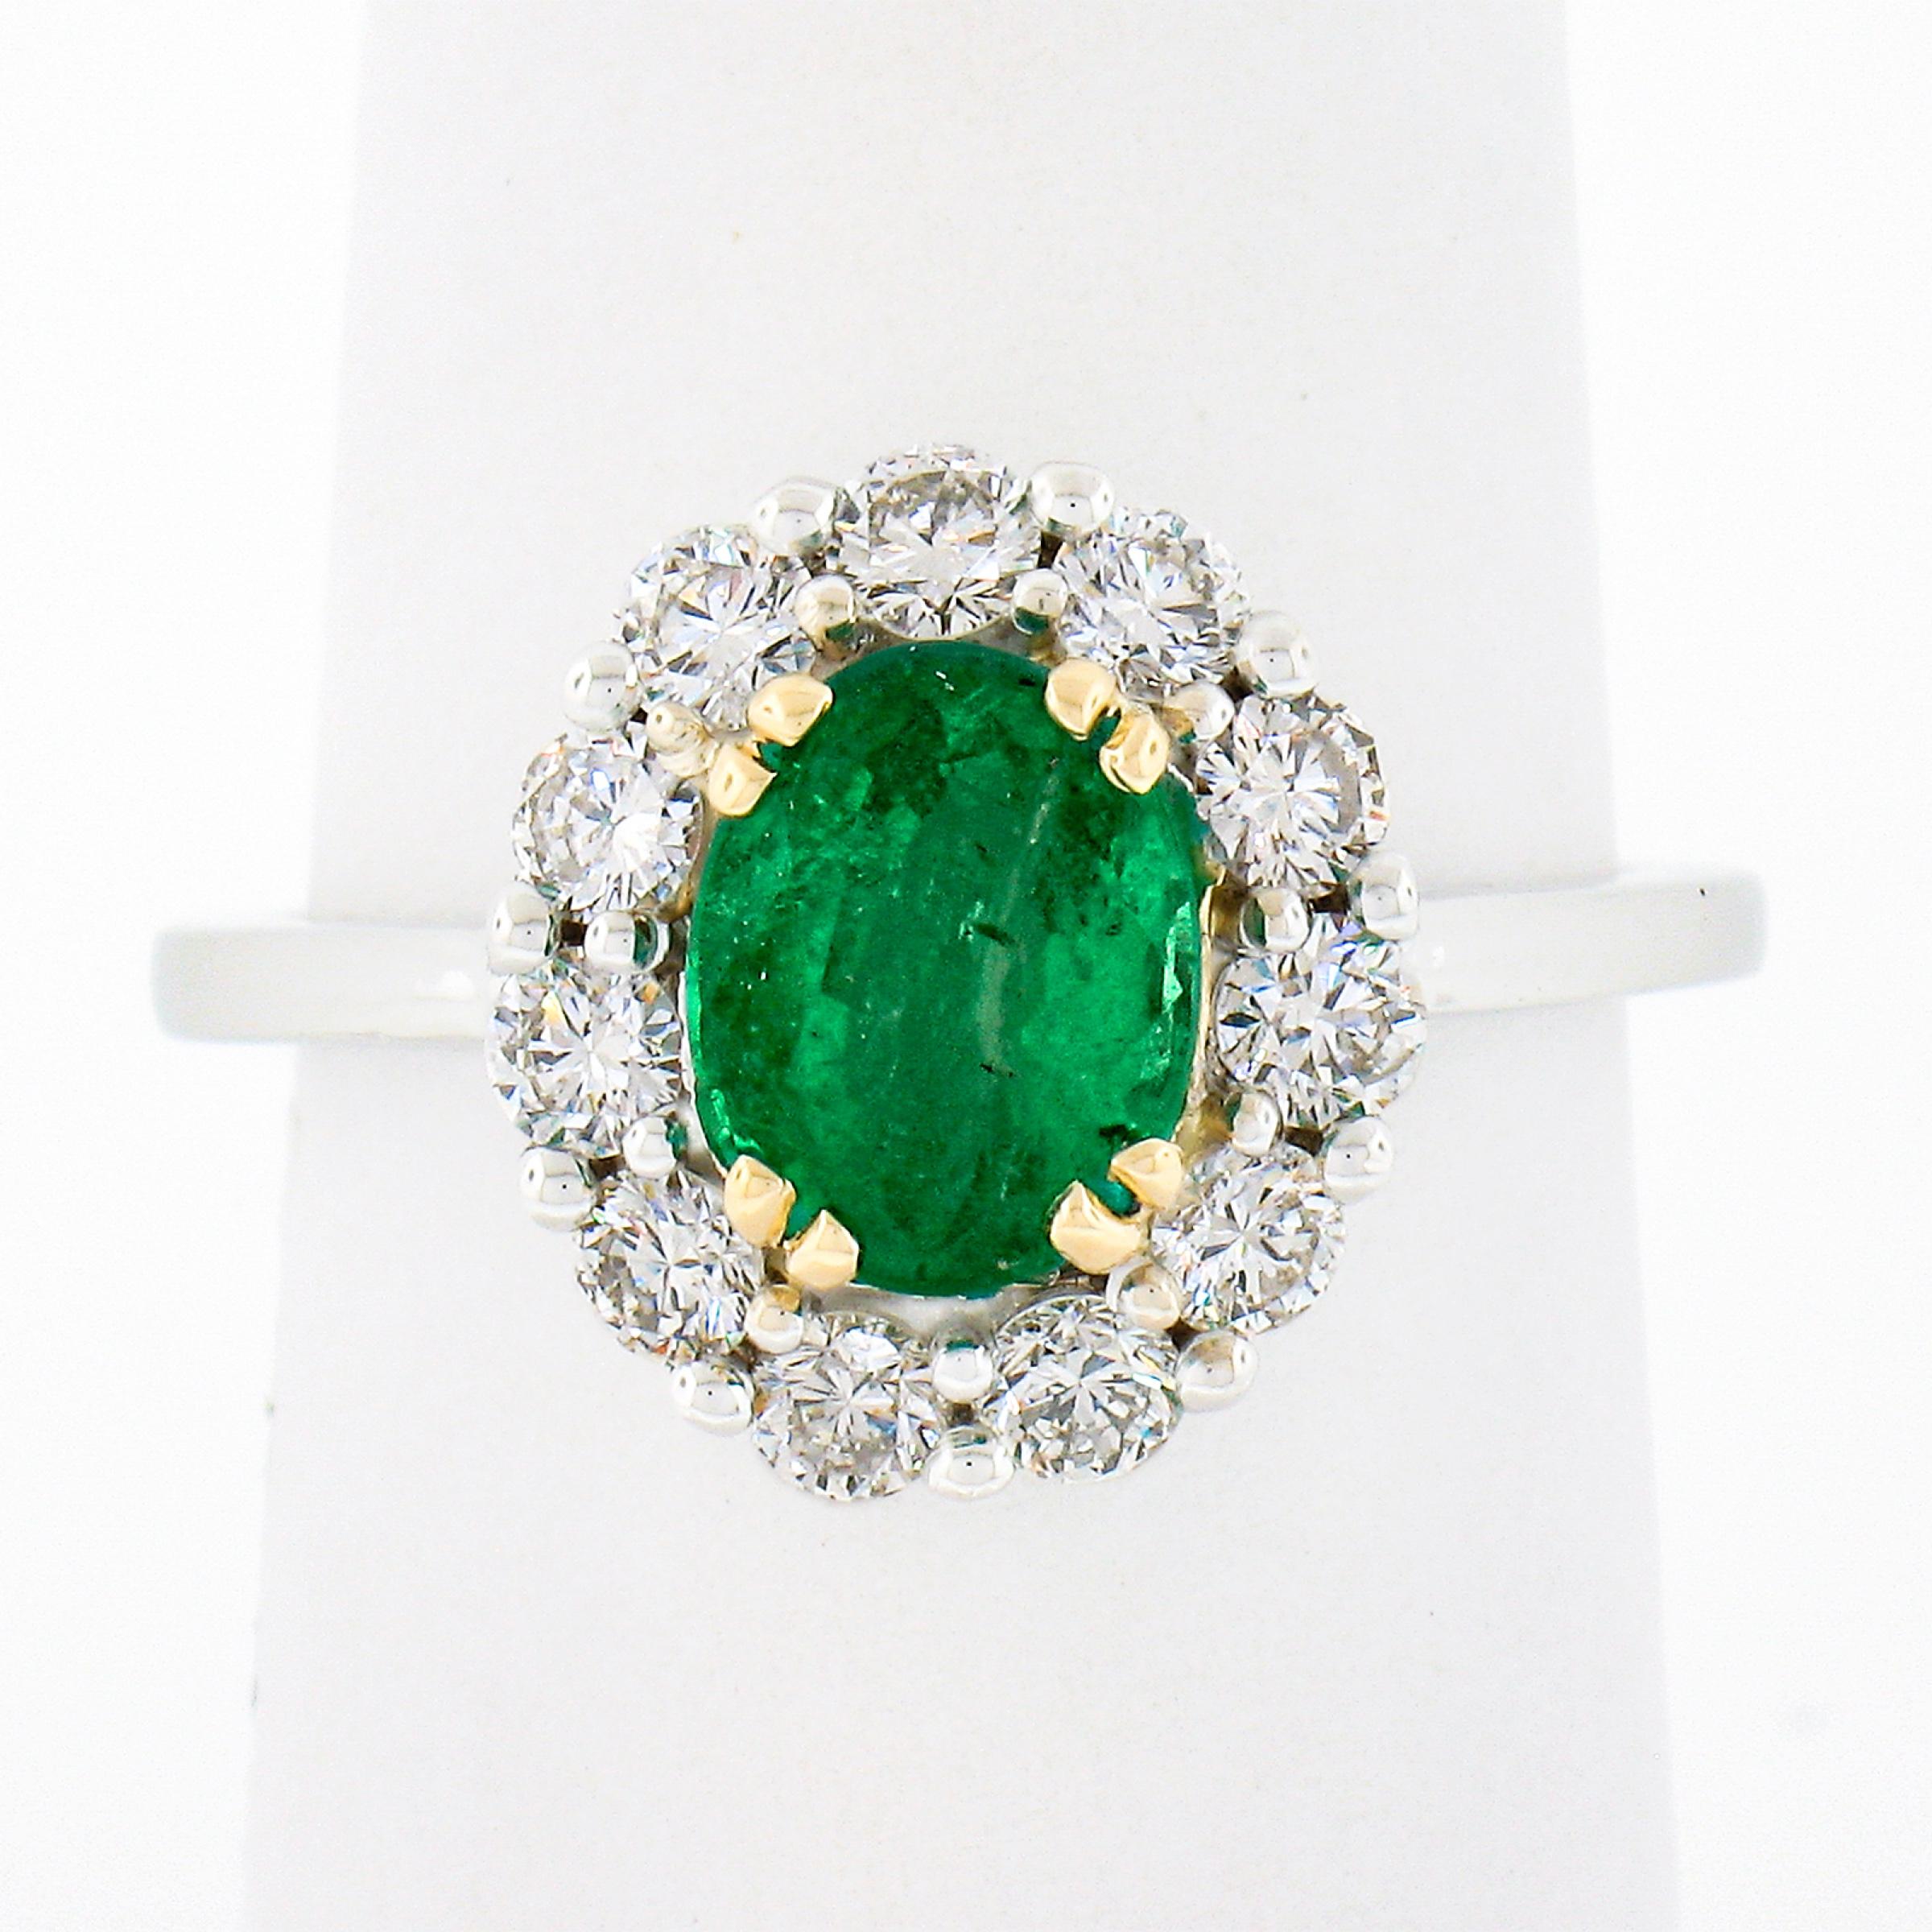 You are looking at a truly breathtaking, custom designed, emerald and diamond ring that is newly crafted in solid 18k white and yellow gold. The oval cut emerald is neatly prong at at the center and displays a truly gorgeous vivid green color that's